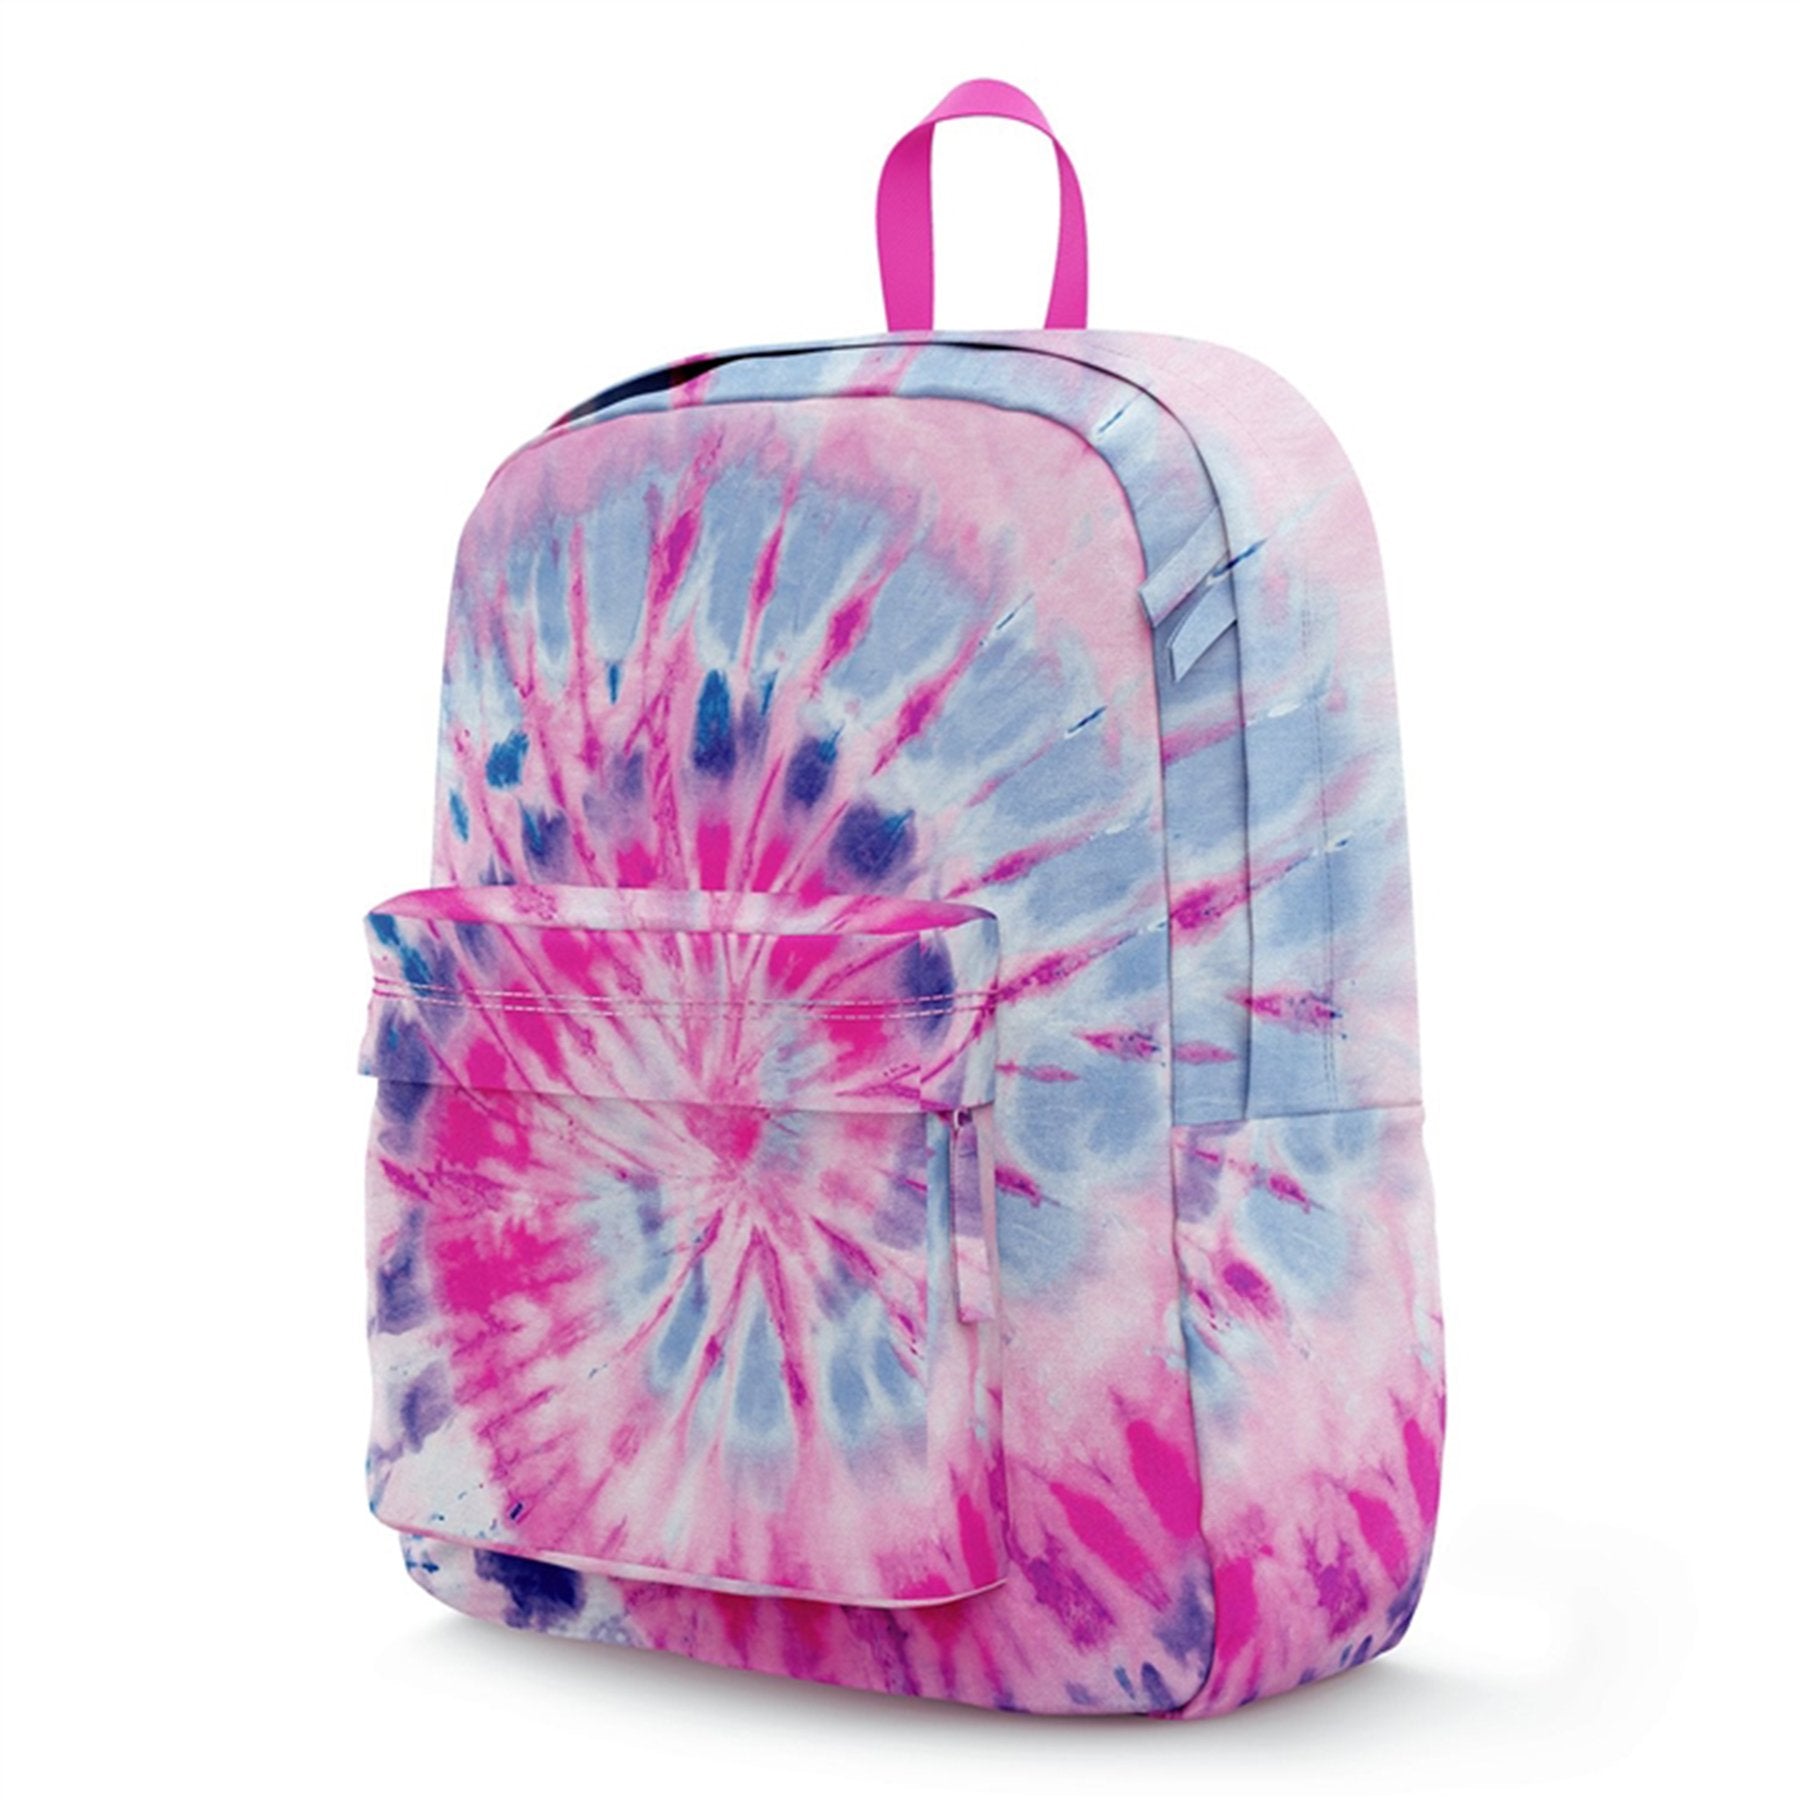 DyeTrans Sublimation Blank Canvas Backpack 